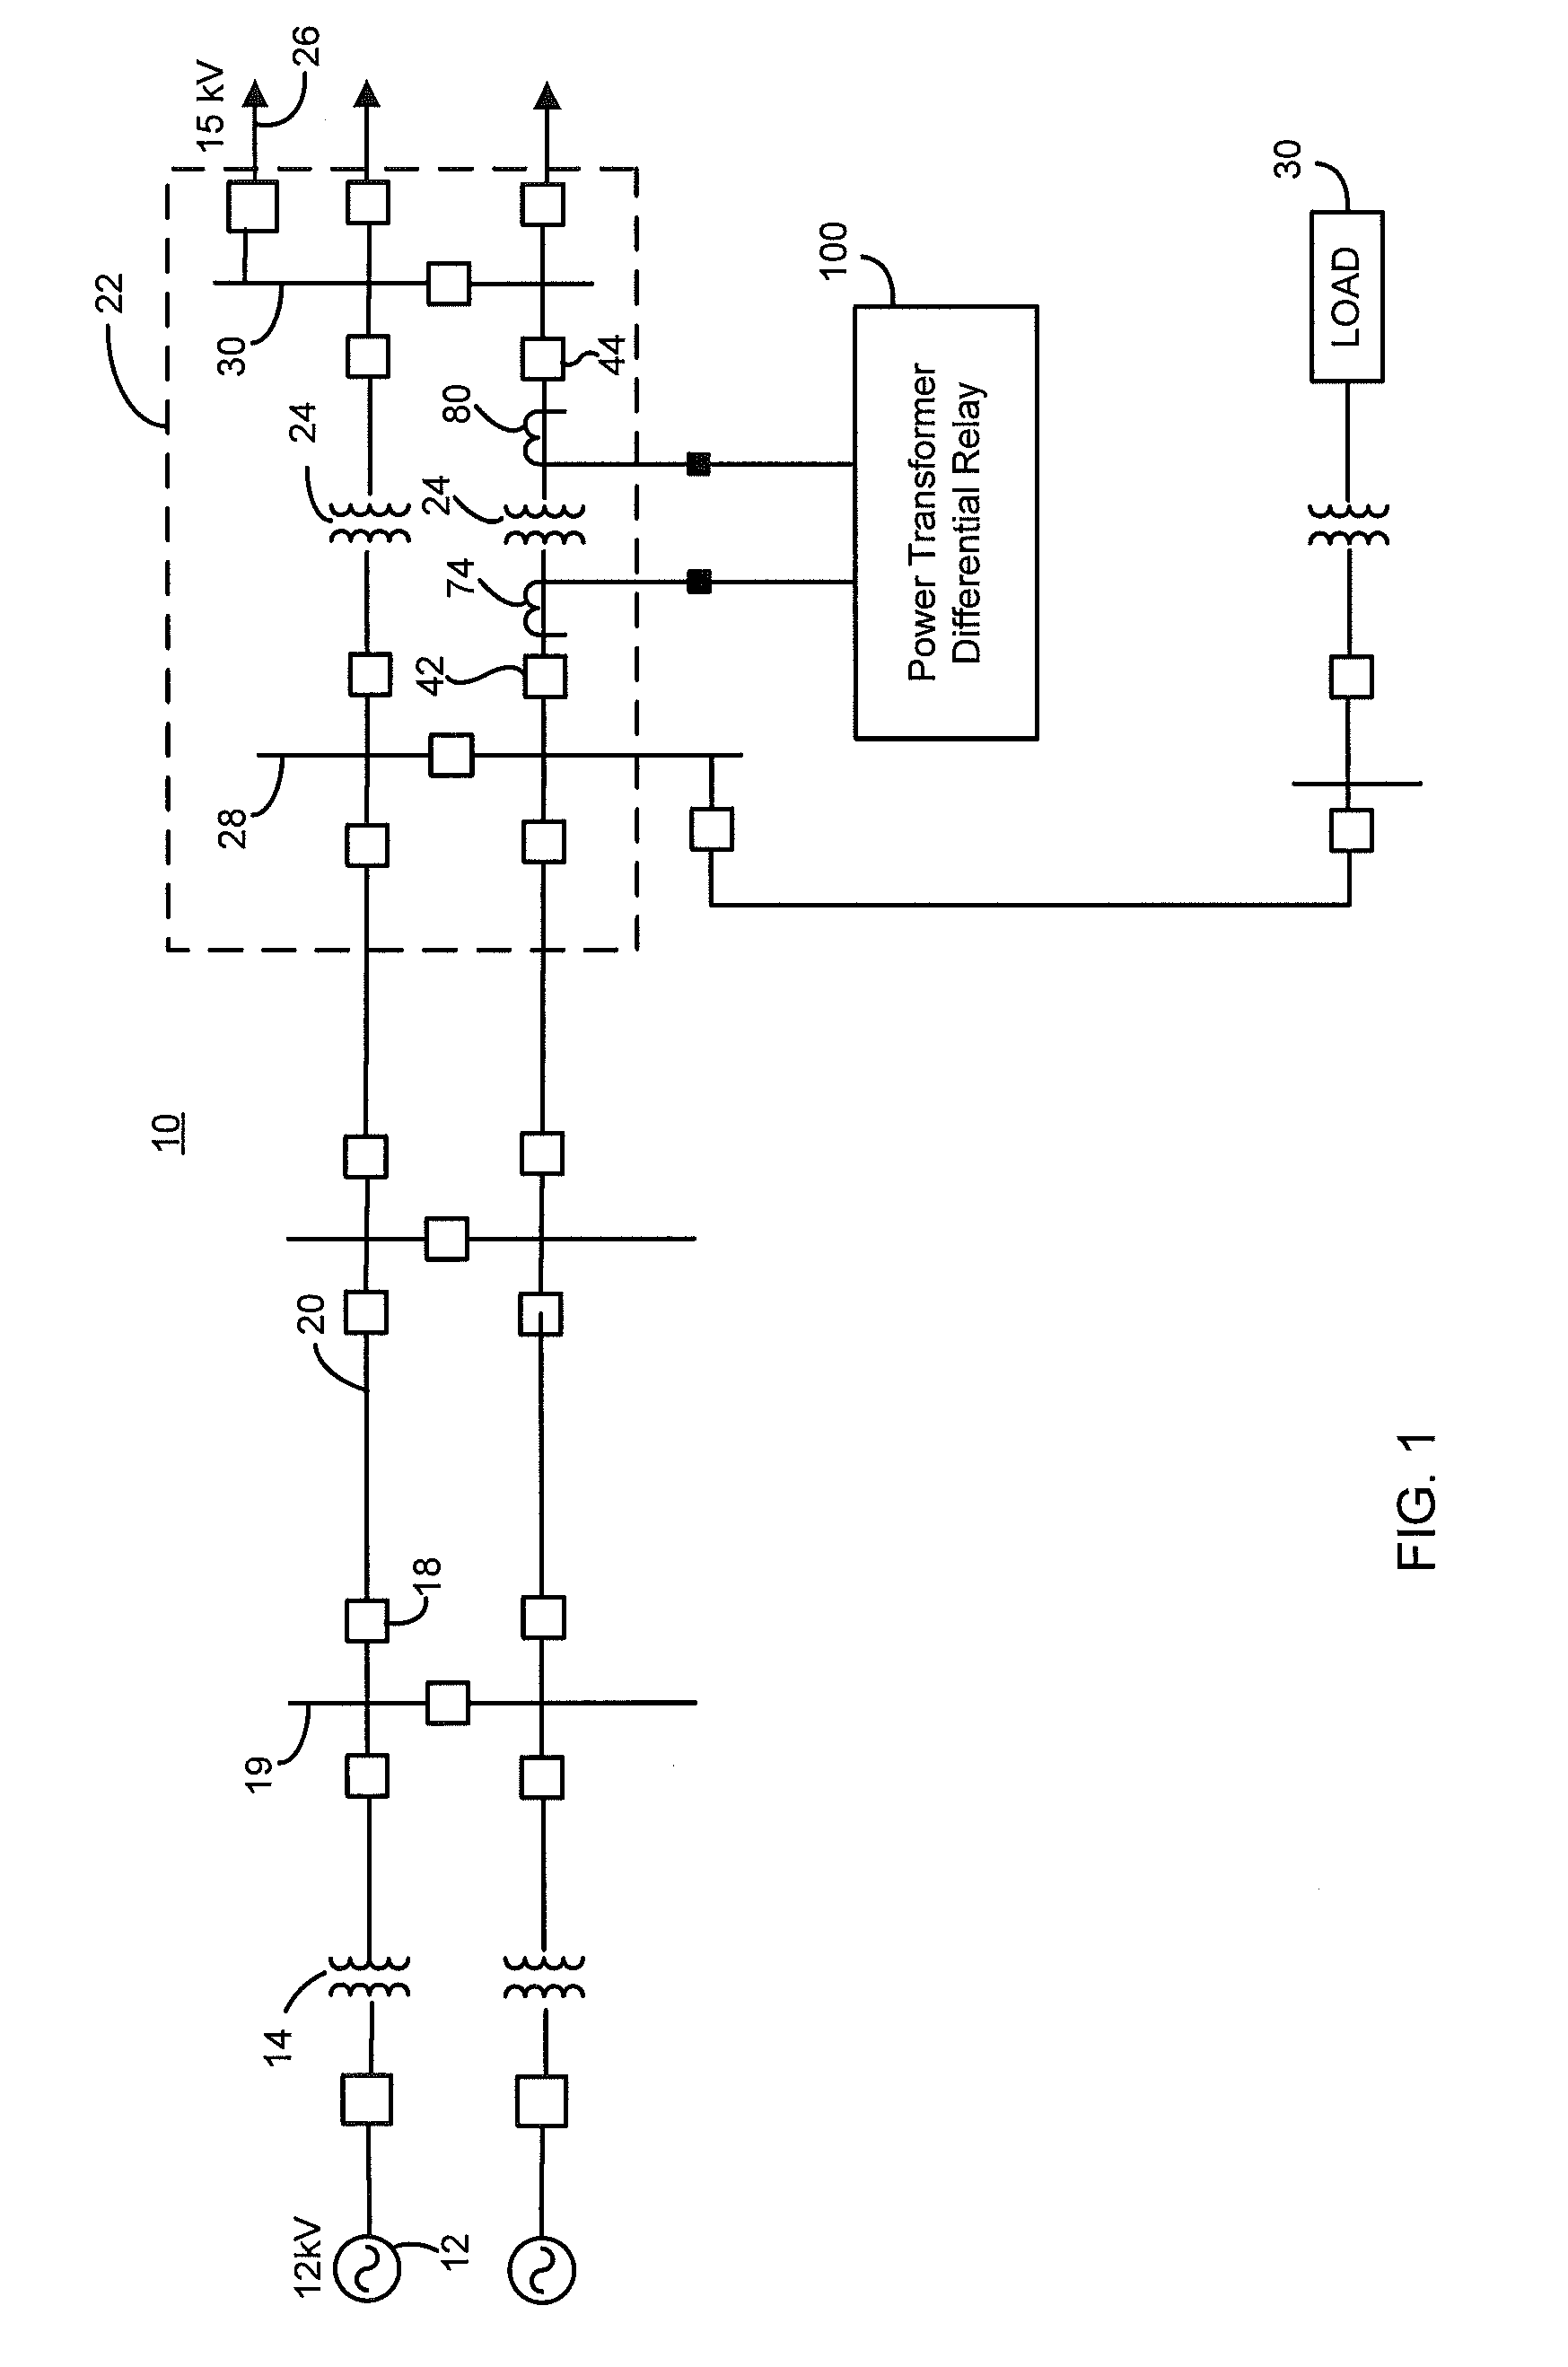 Apparatus and method for compensating secondary currents used in differential protection to correct for a phase shift introduced between high voltage and low voltage transformer windings